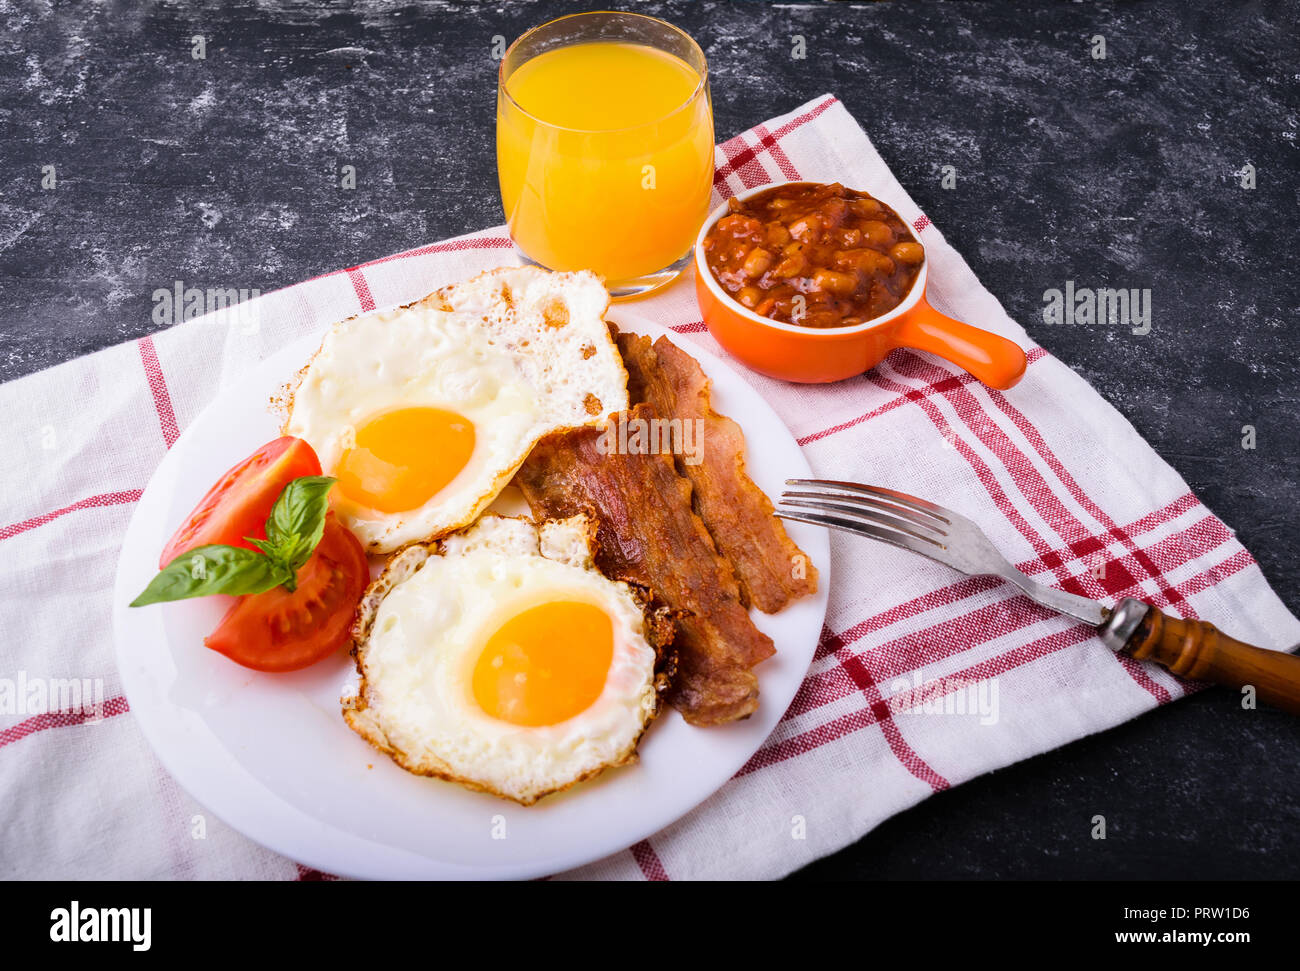 English breakfast - bacon, fried eggs, beans and orange juice. Served on white plate with sliced tomato and basil leaves. Dark grunge concrete table b Stock Photo